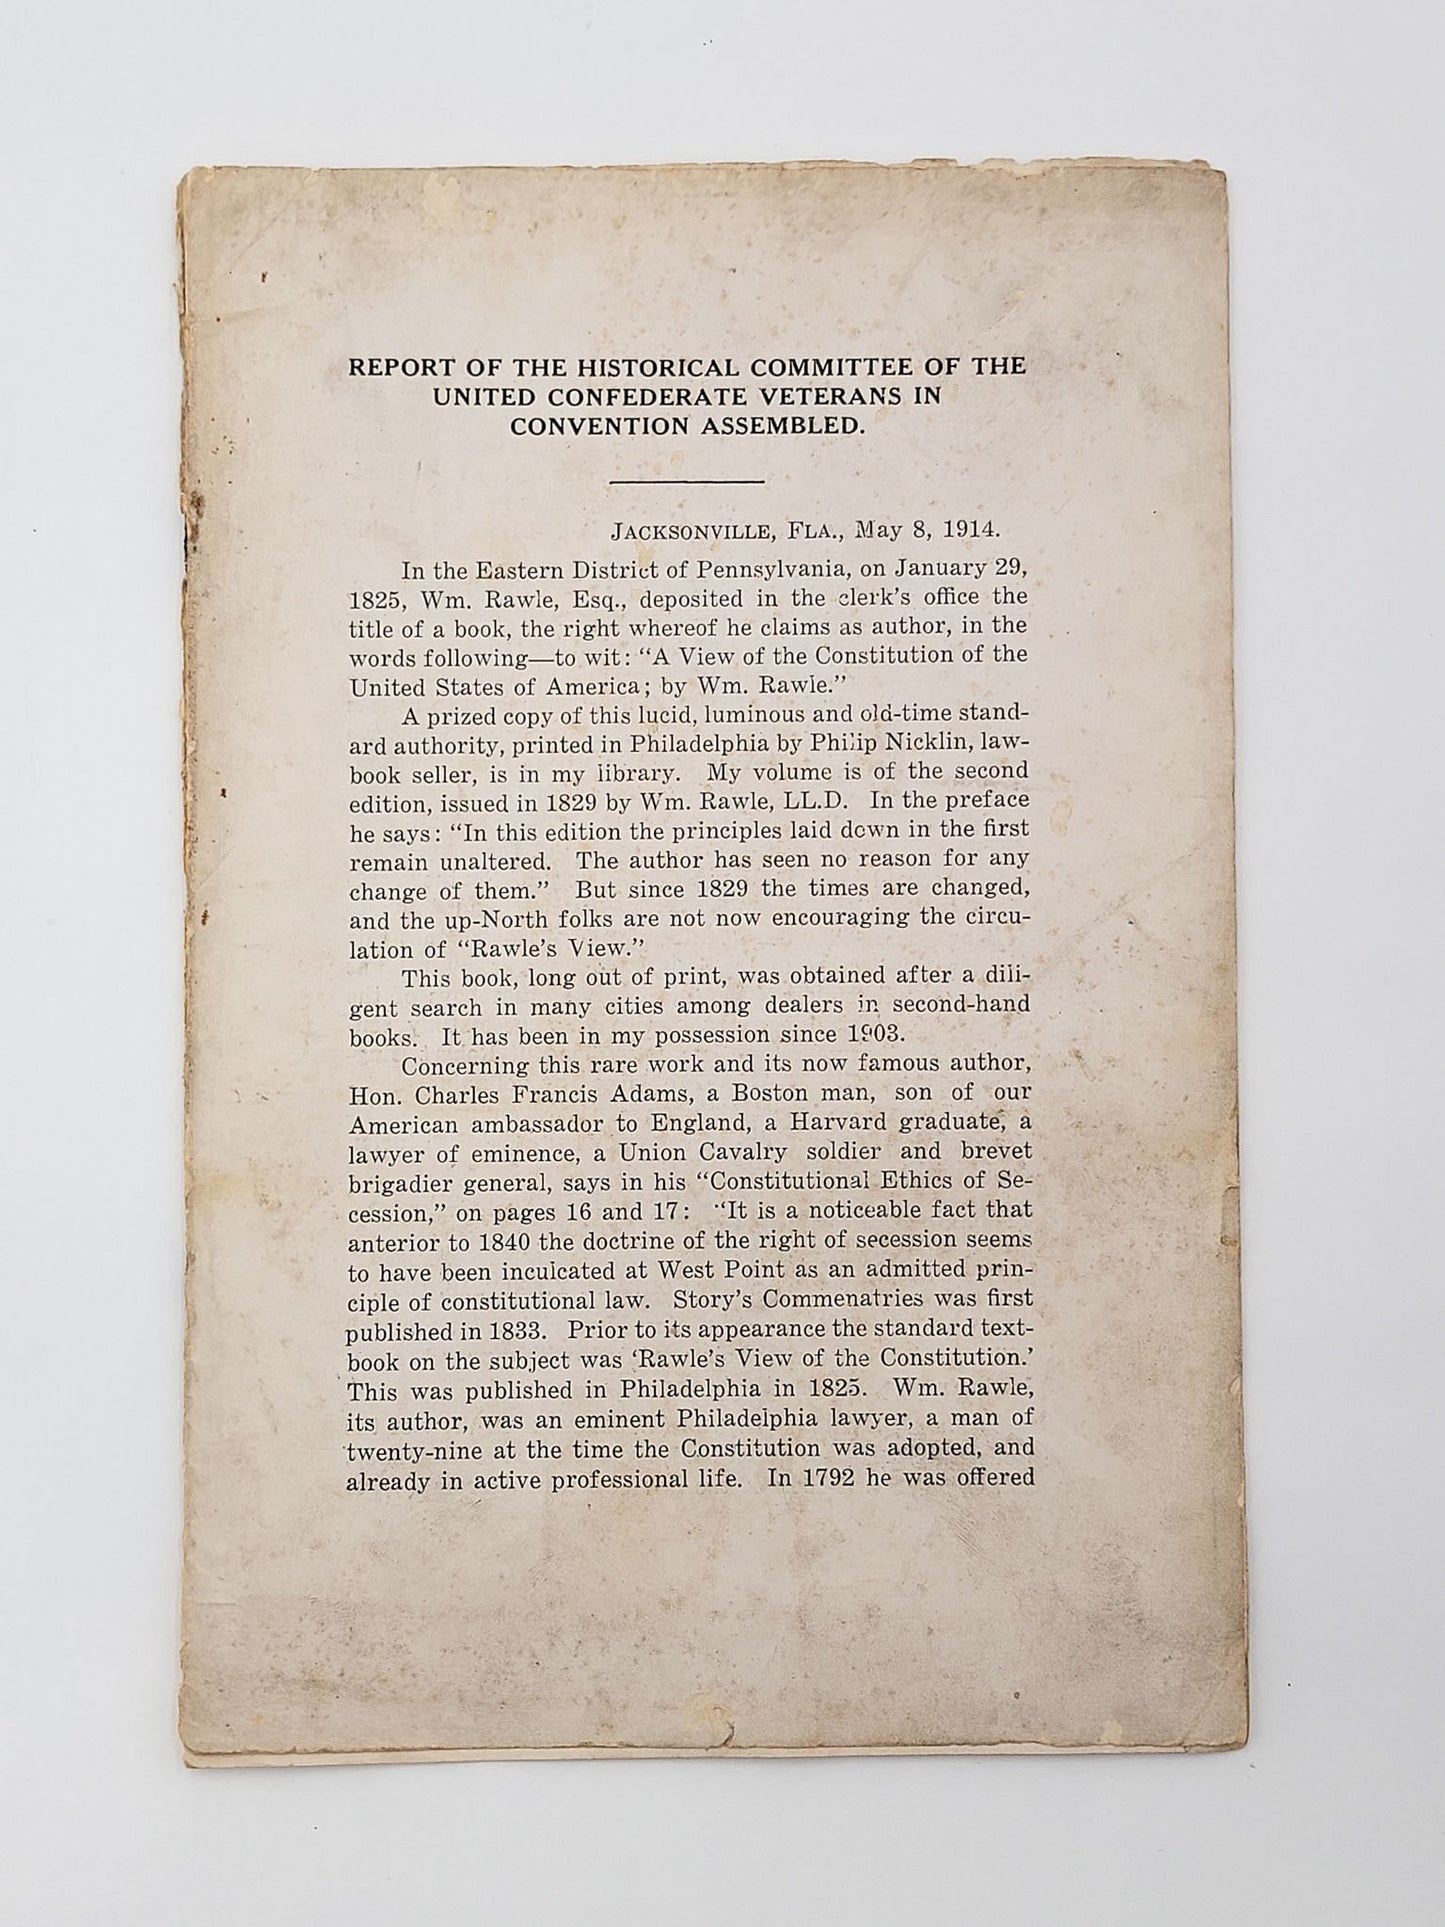 Report of the Historical Committee of Confederate Veterans in Convention Assembled